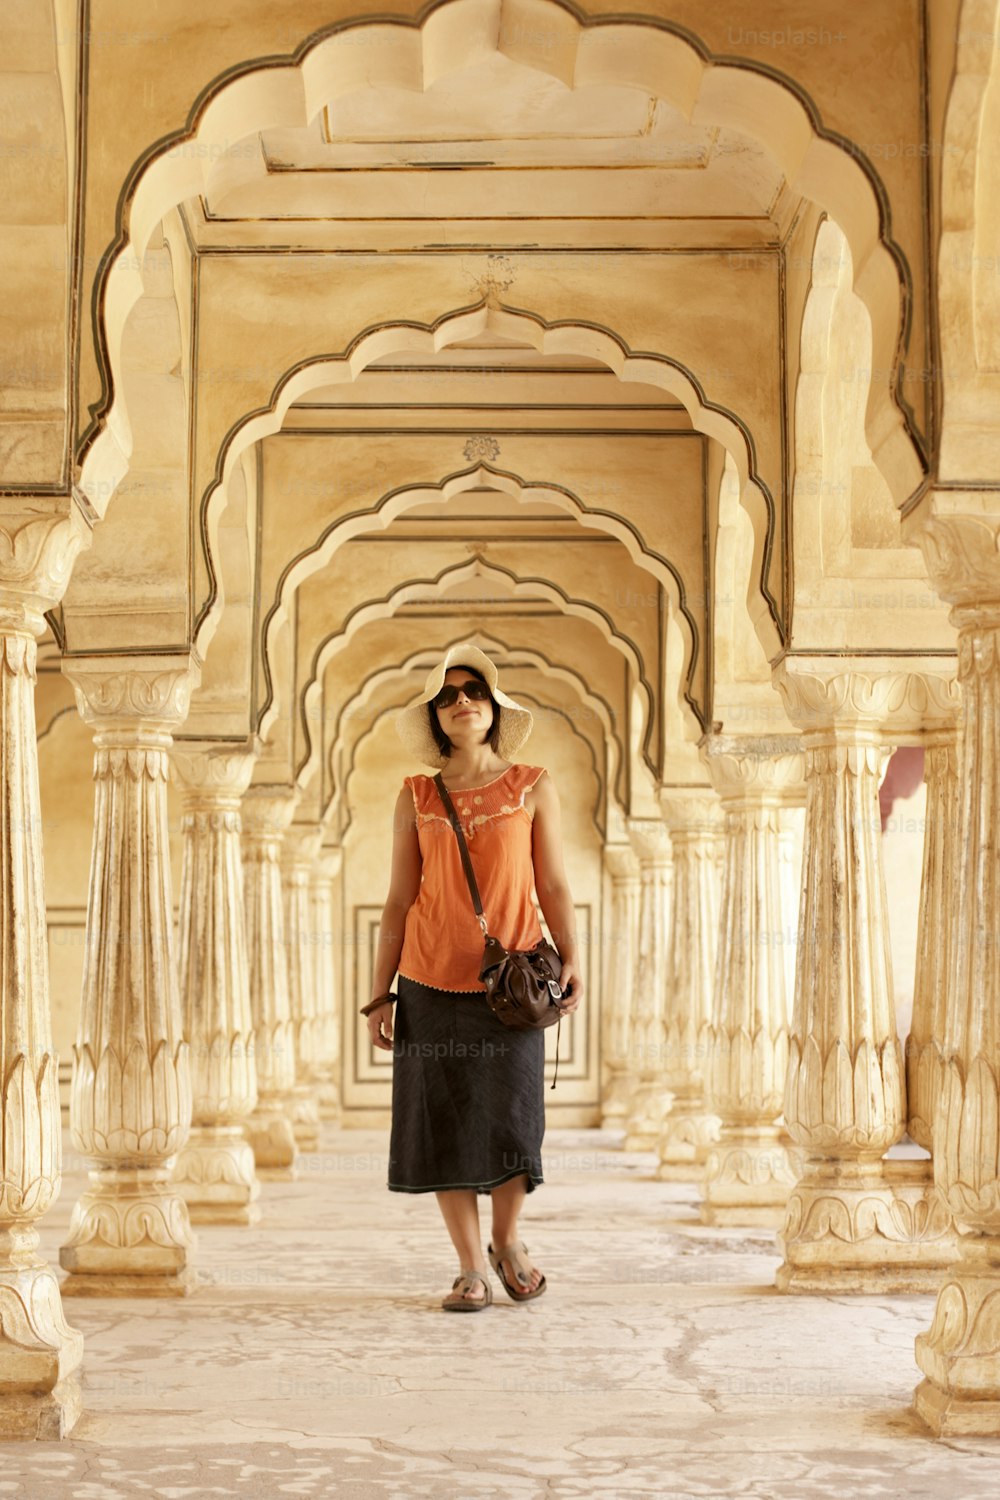 a woman in an orange shirt and black skirt standing in a building